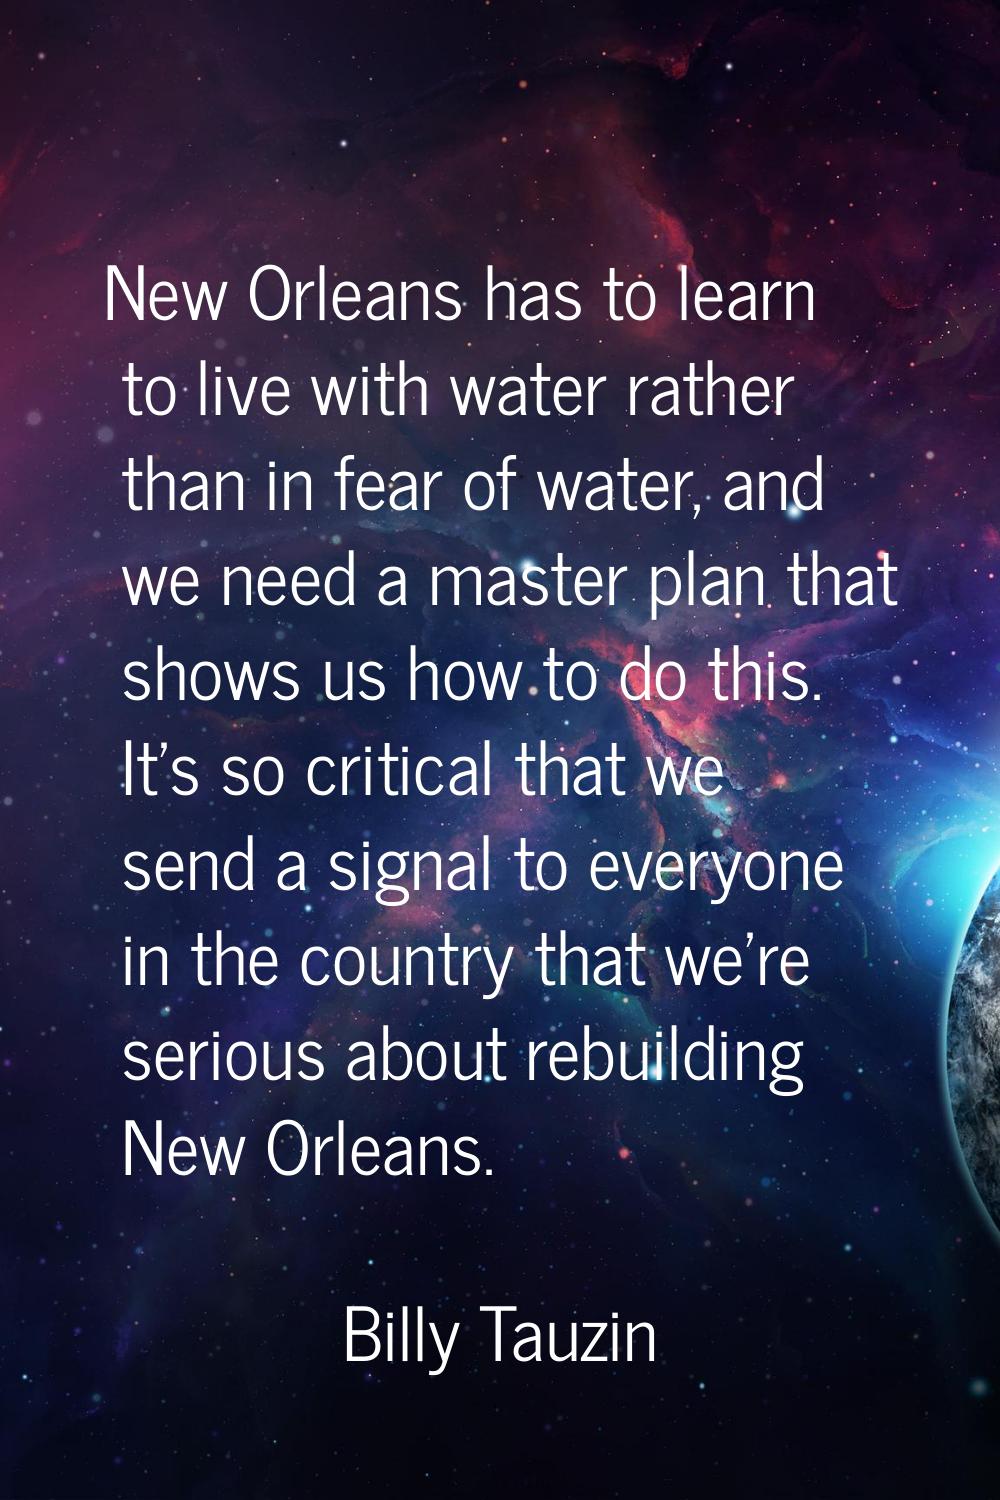 New Orleans has to learn to live with water rather than in fear of water, and we need a master plan